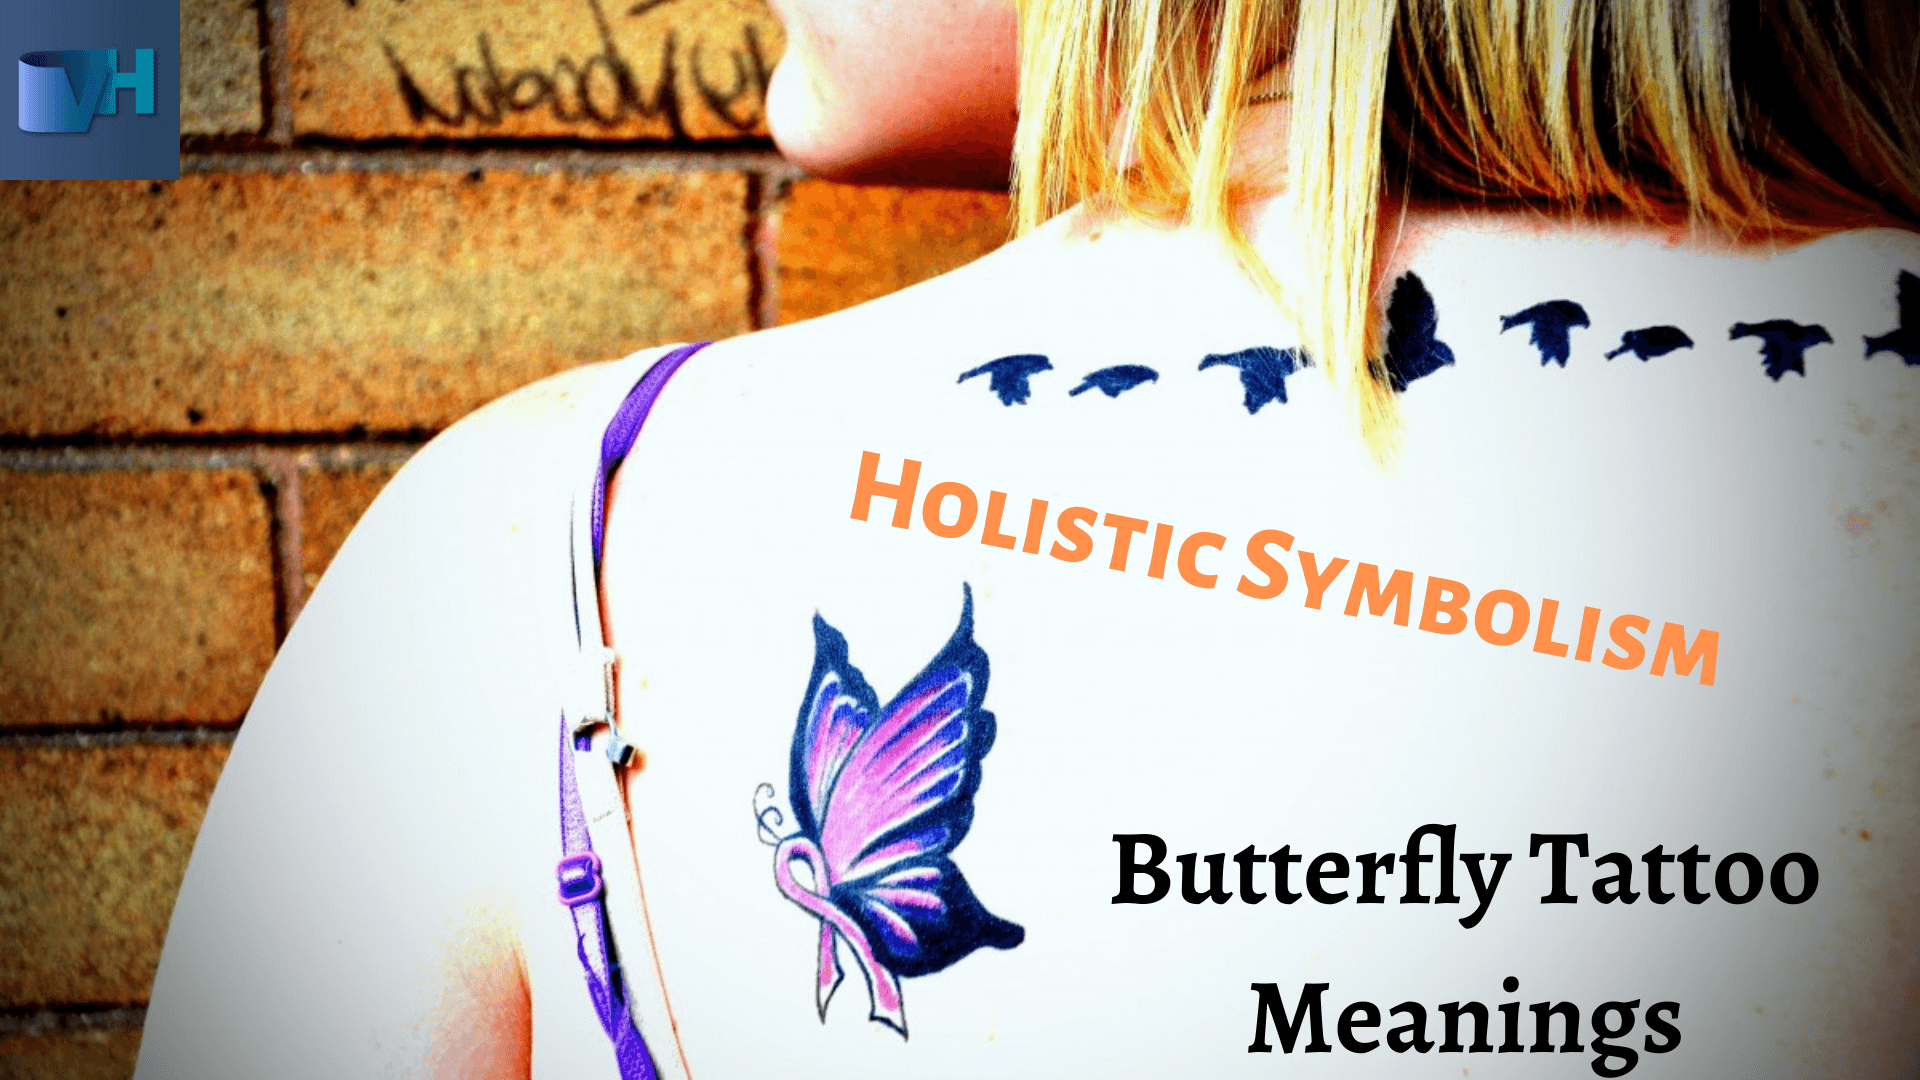 The spiritual meaning of Butterfly Tattoo